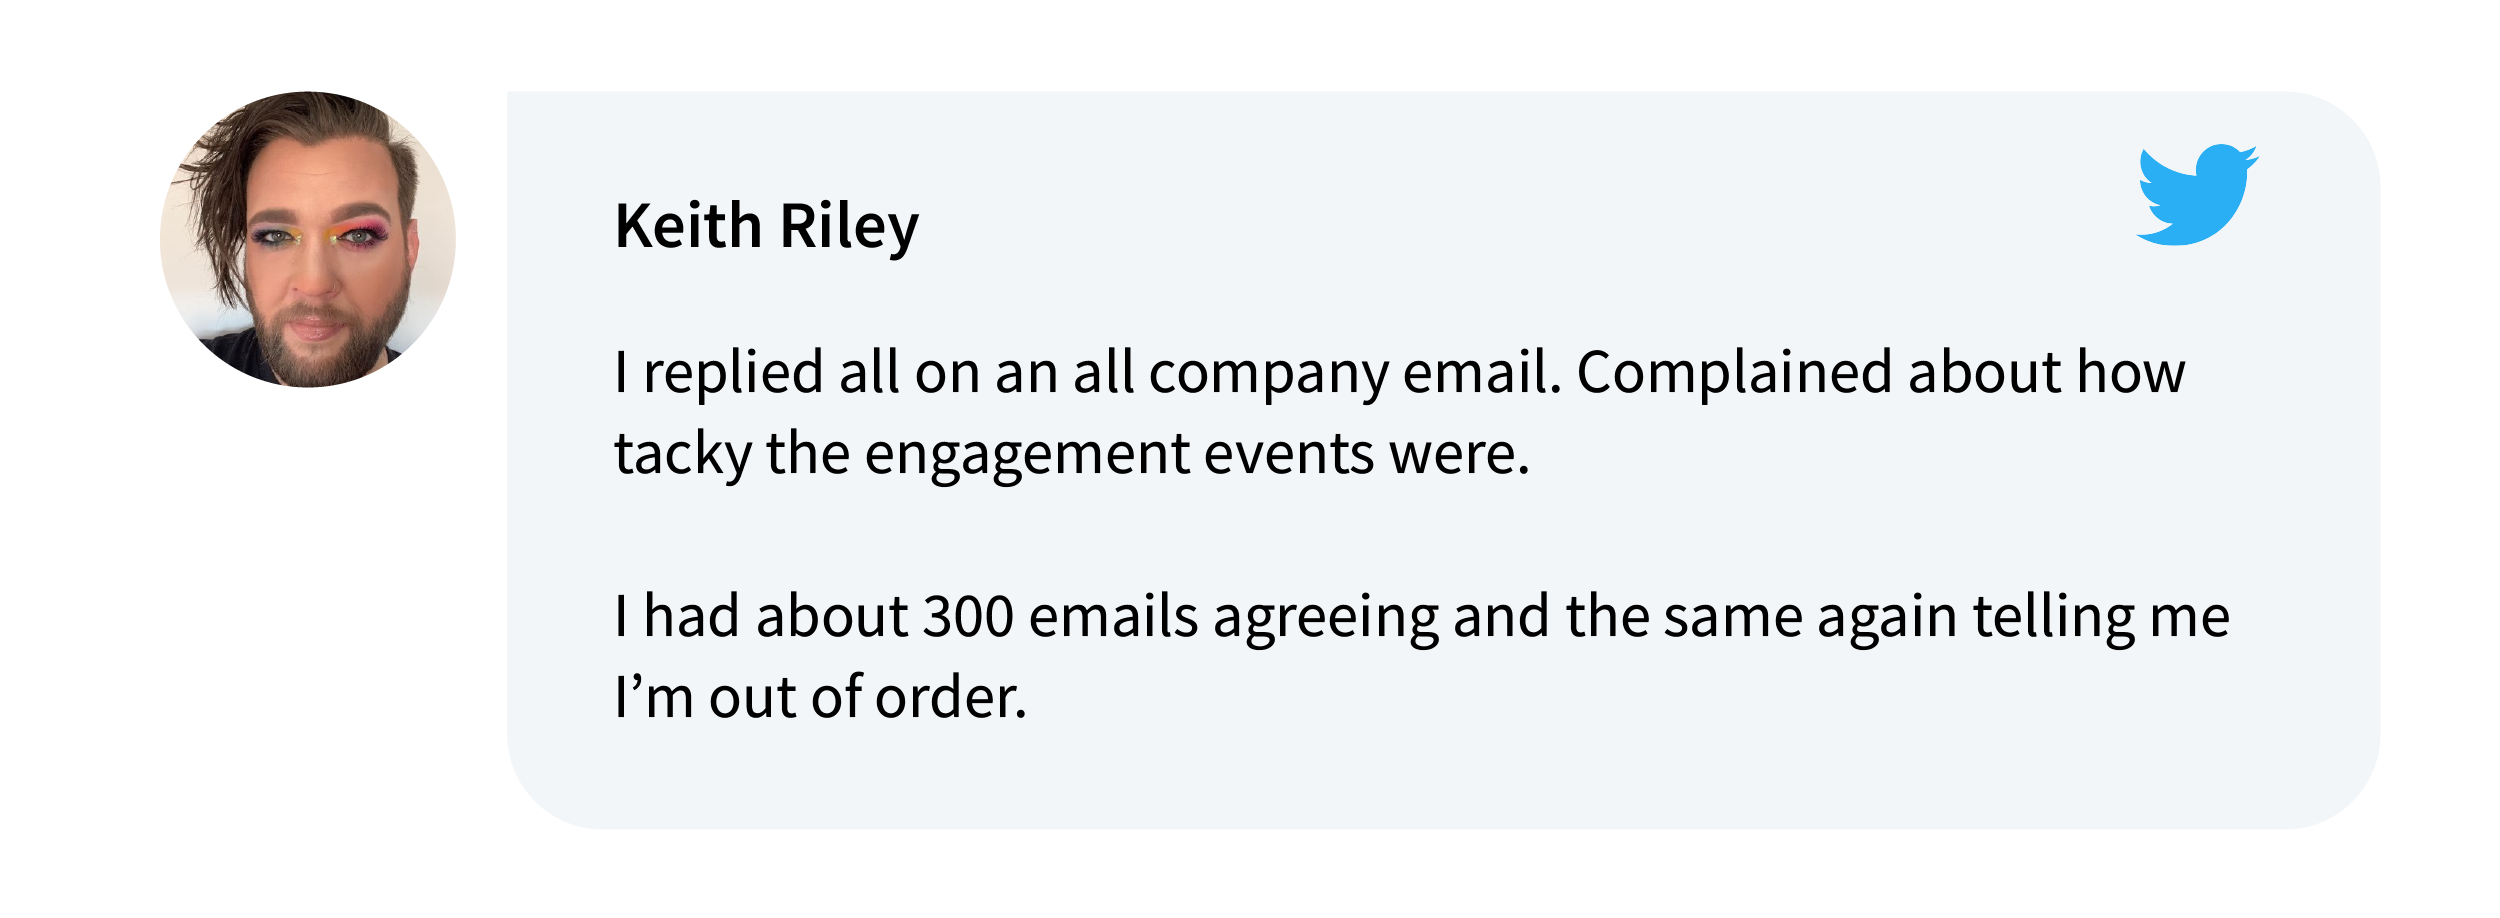 Keith Riley on Twitter: I replied all on an all company email. Complained about how tacky the engagement events were. I had about 300 emails agreeing and the same again telling me I’m out of order.